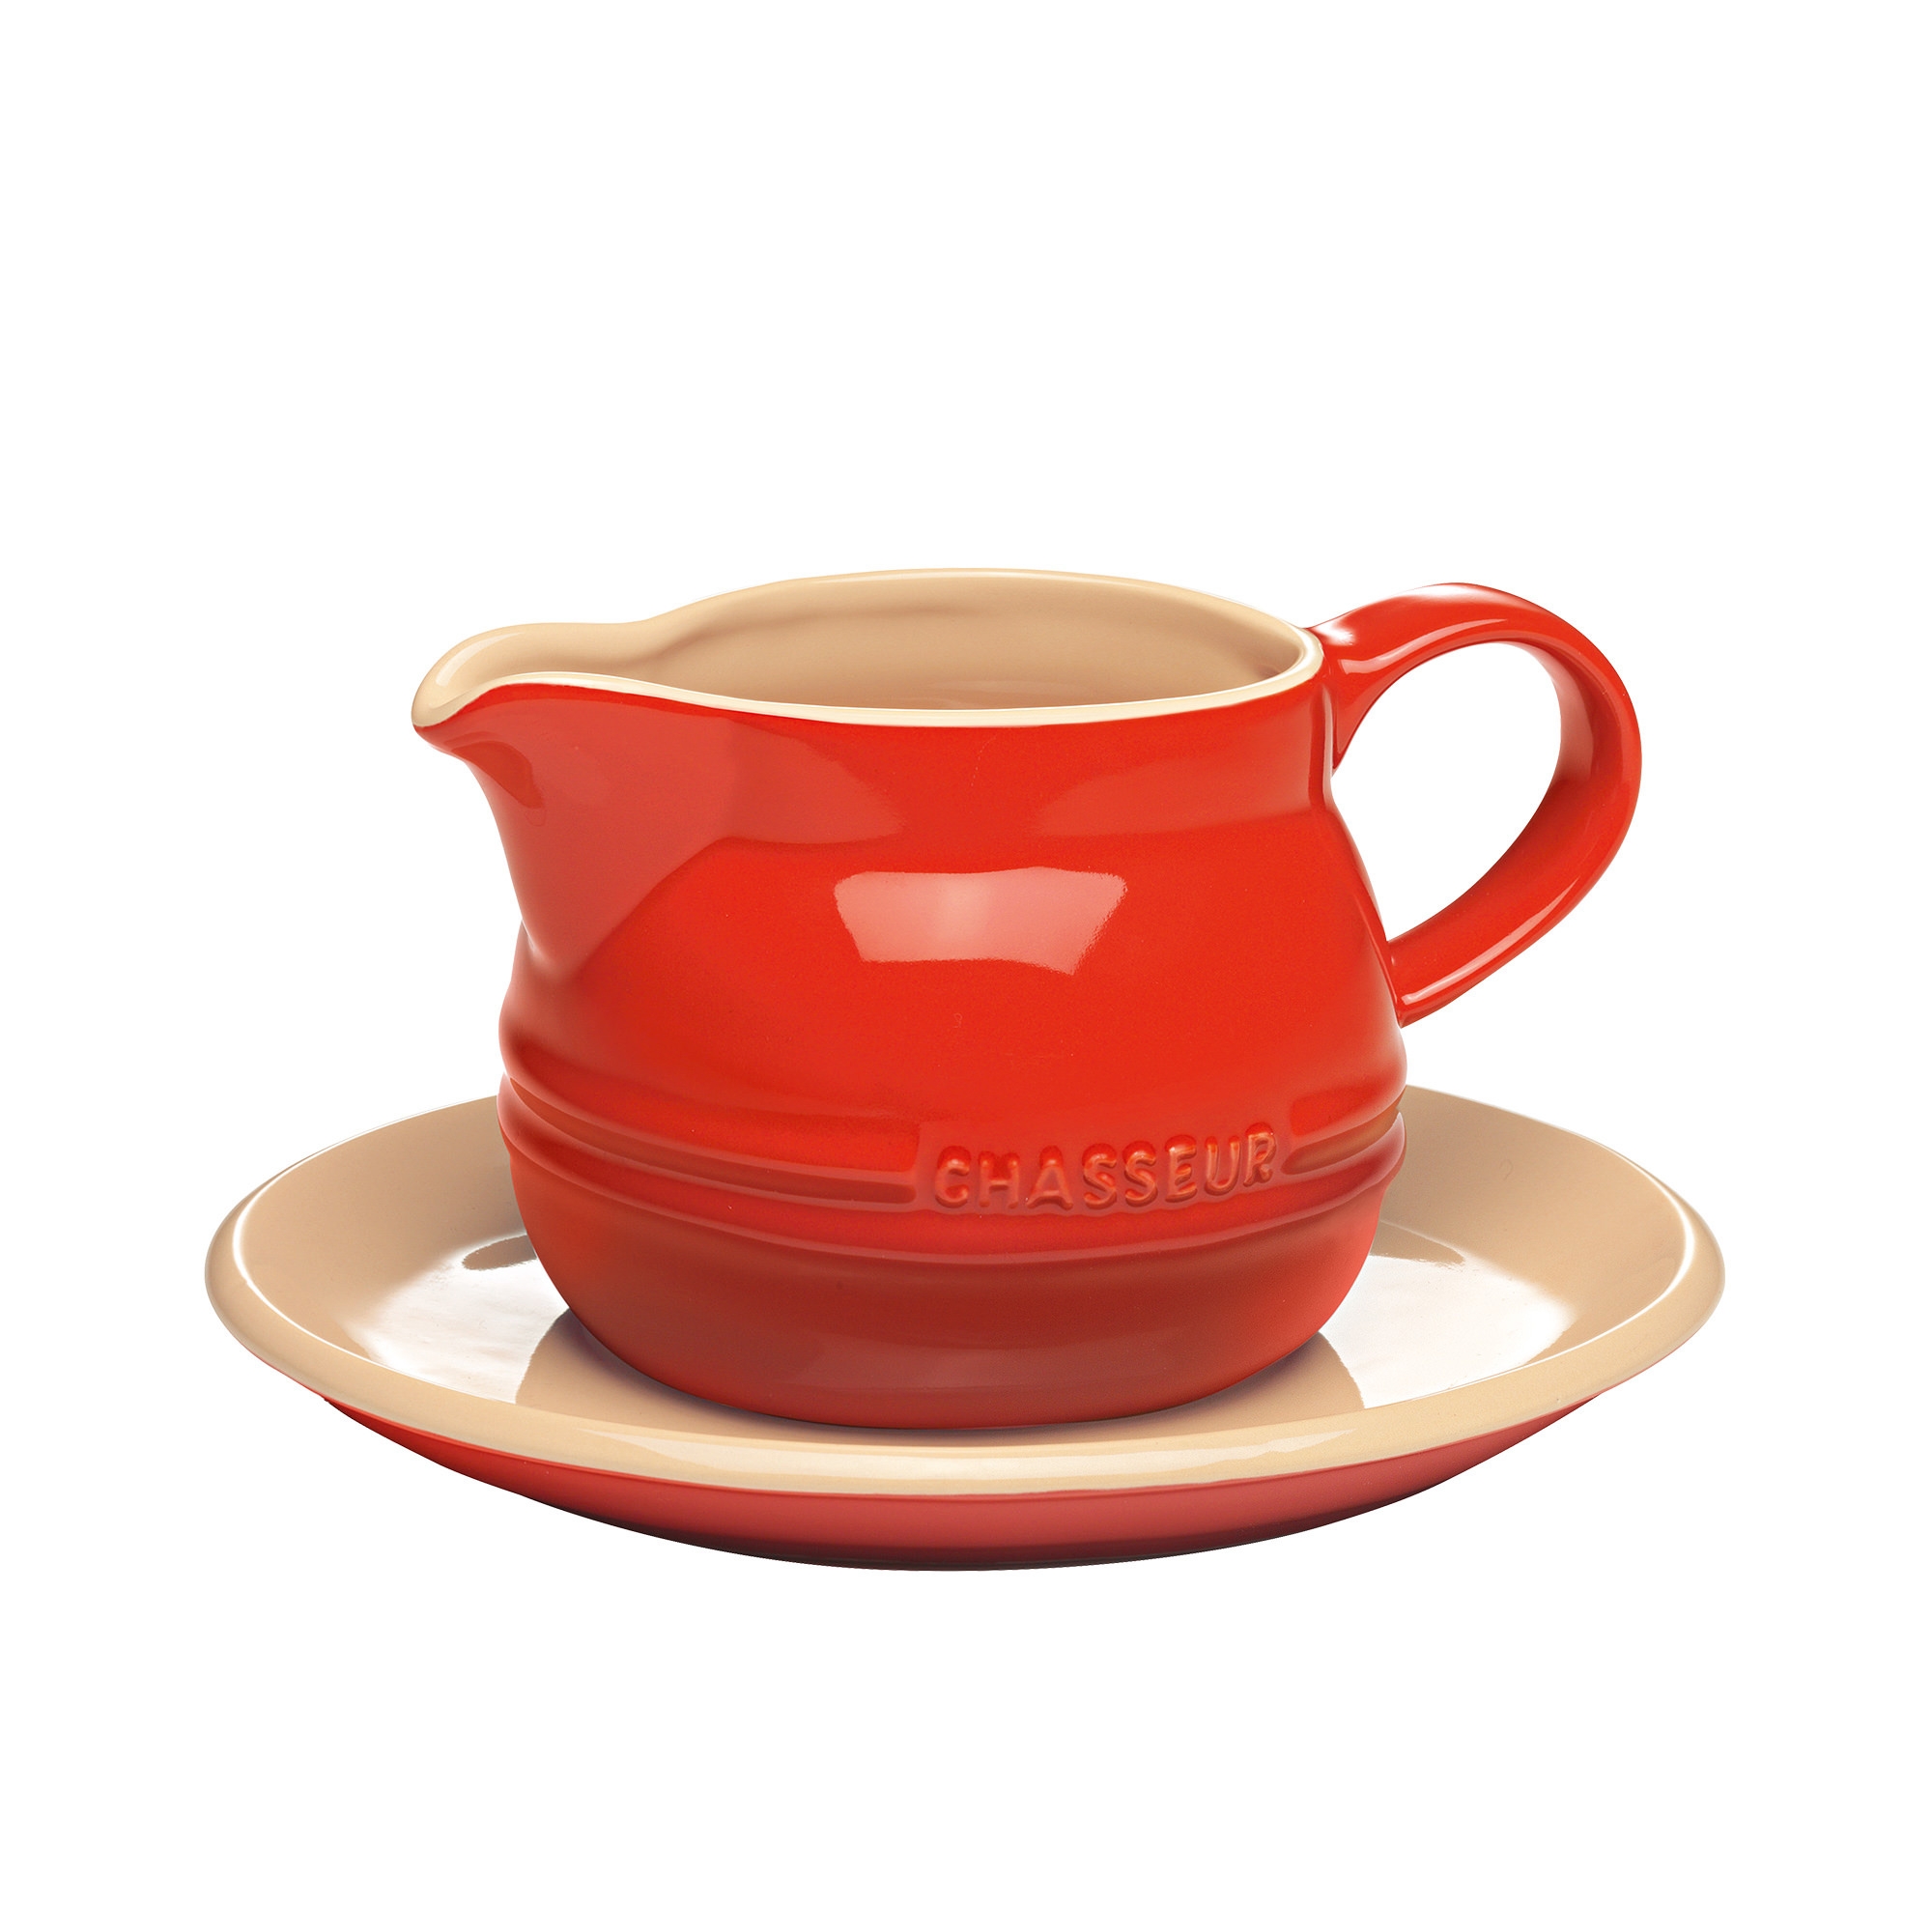 Chasseur La Cuisson Gravy Boat & Saucer 450ml Red Image 1